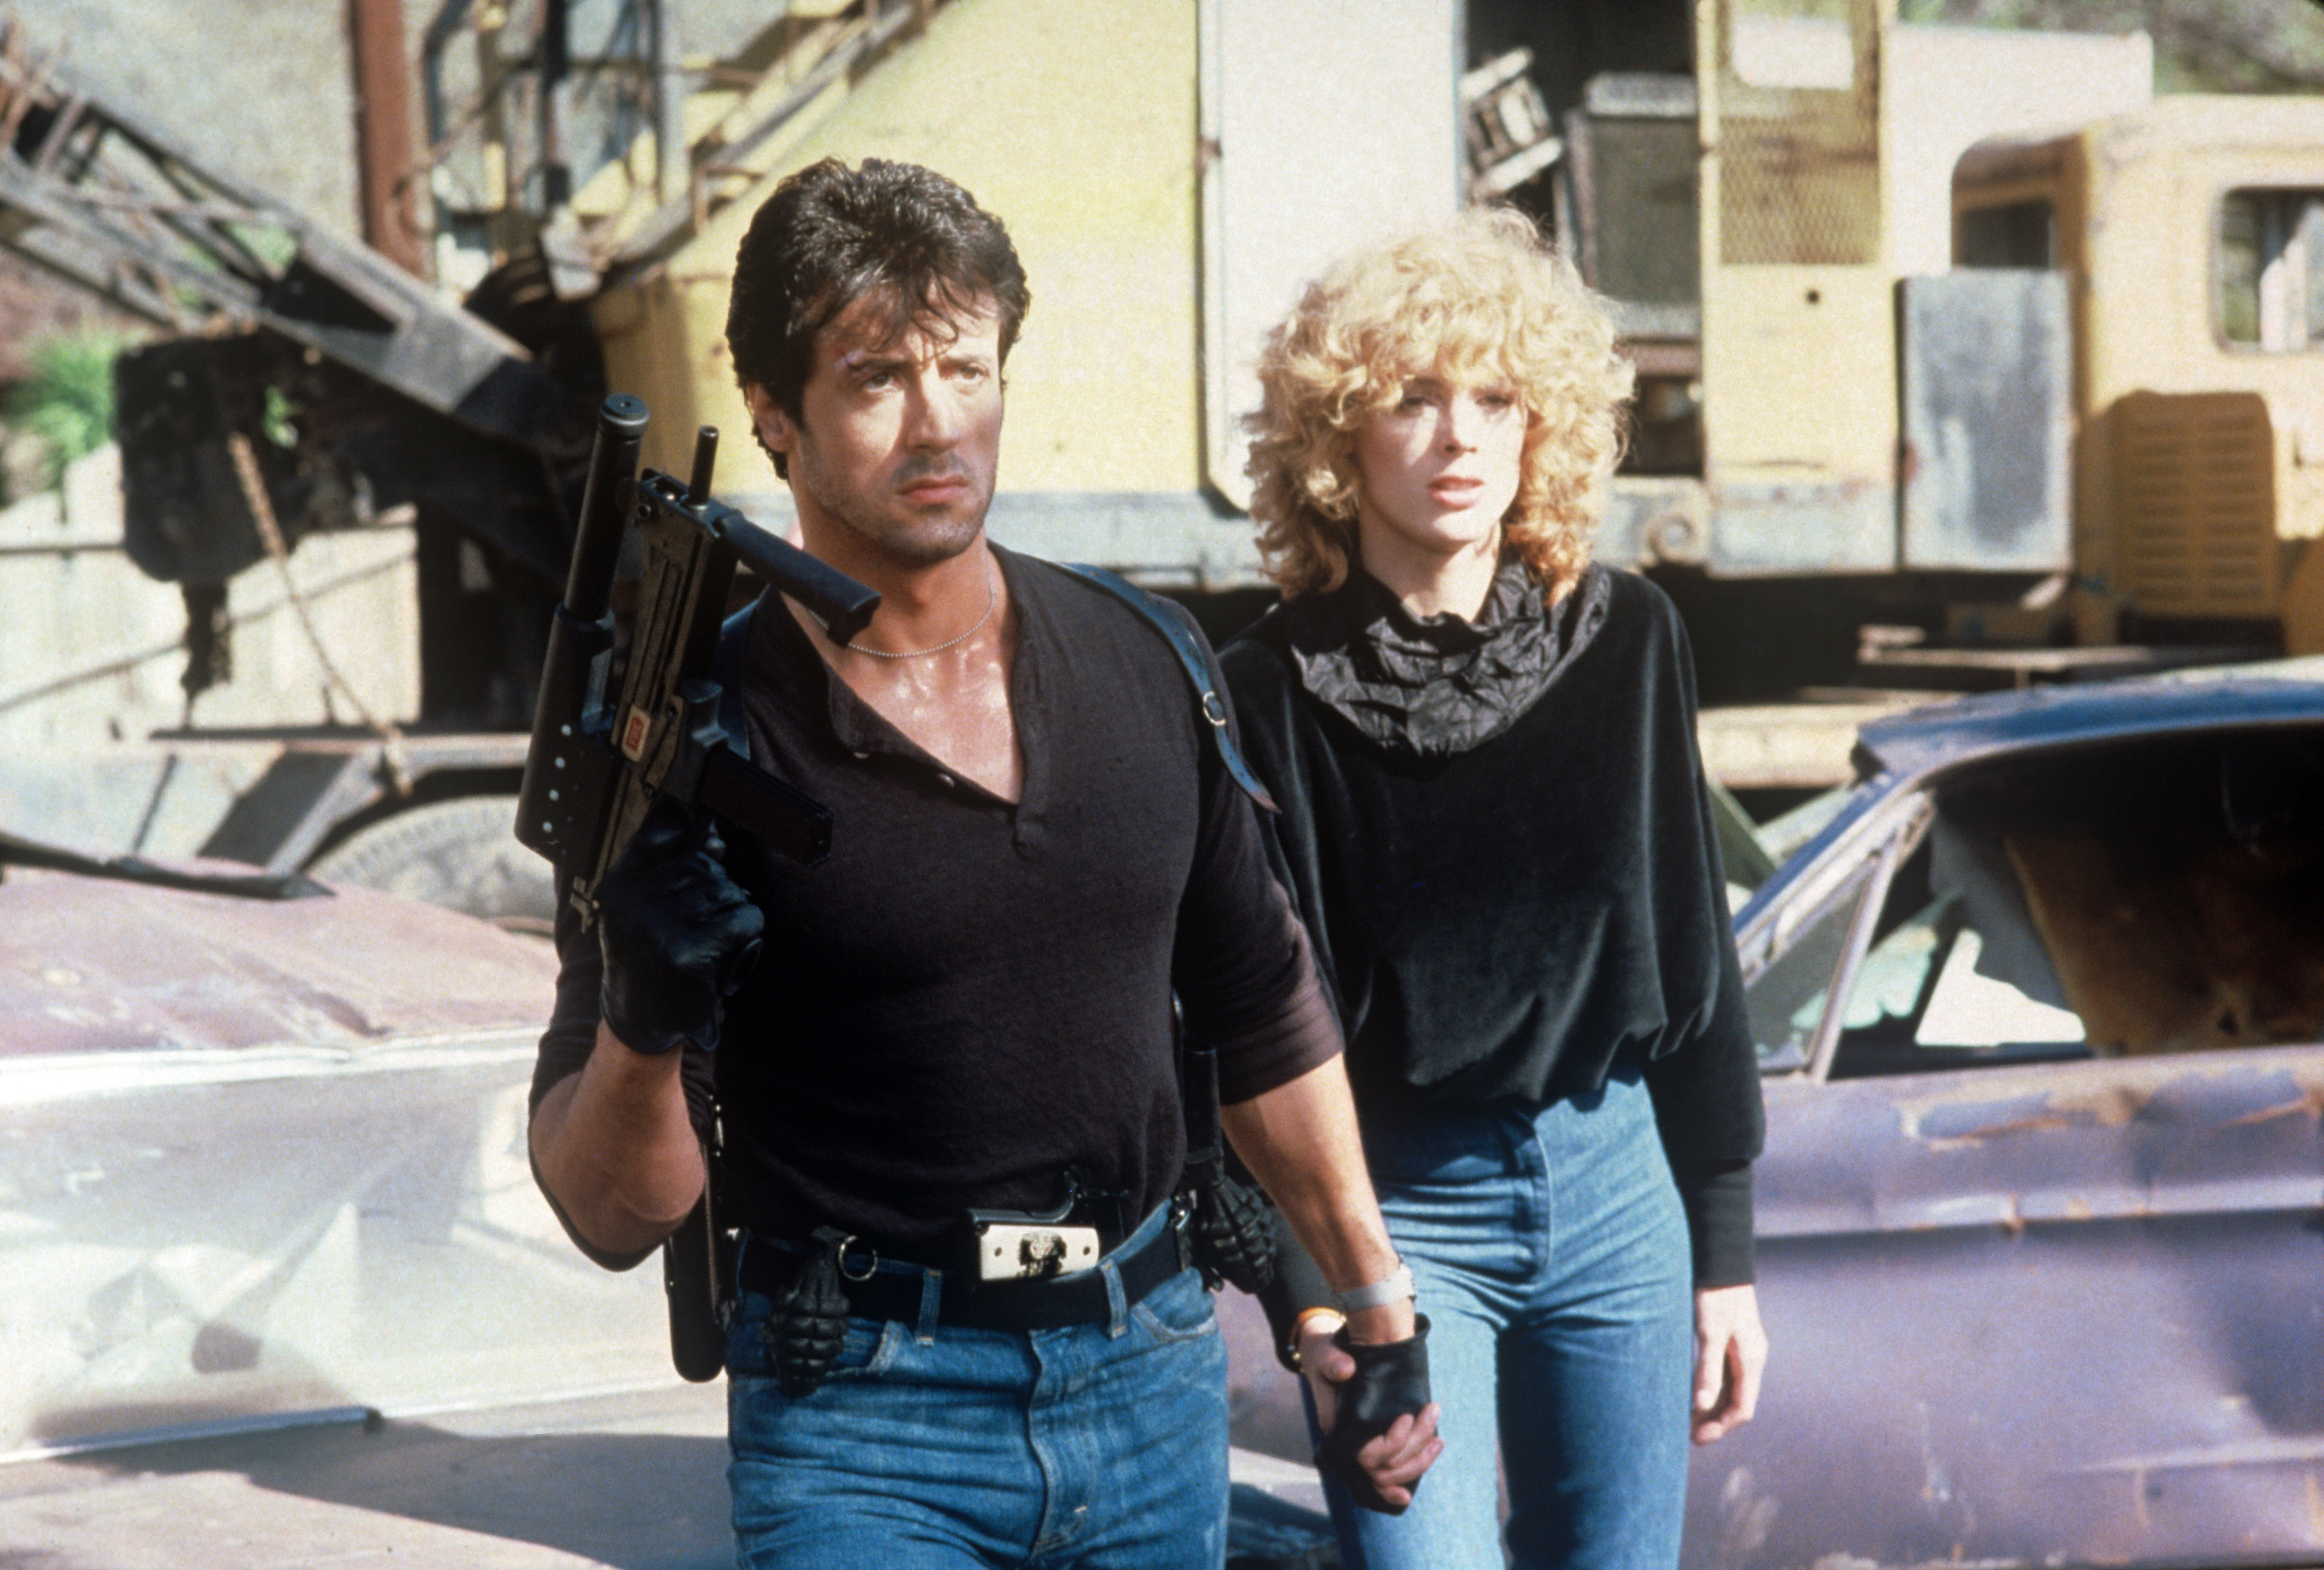 Sylvester Stallone and Brigitte Nielsen in a scene from "Cobra" in 1986 | Source: Getty Images